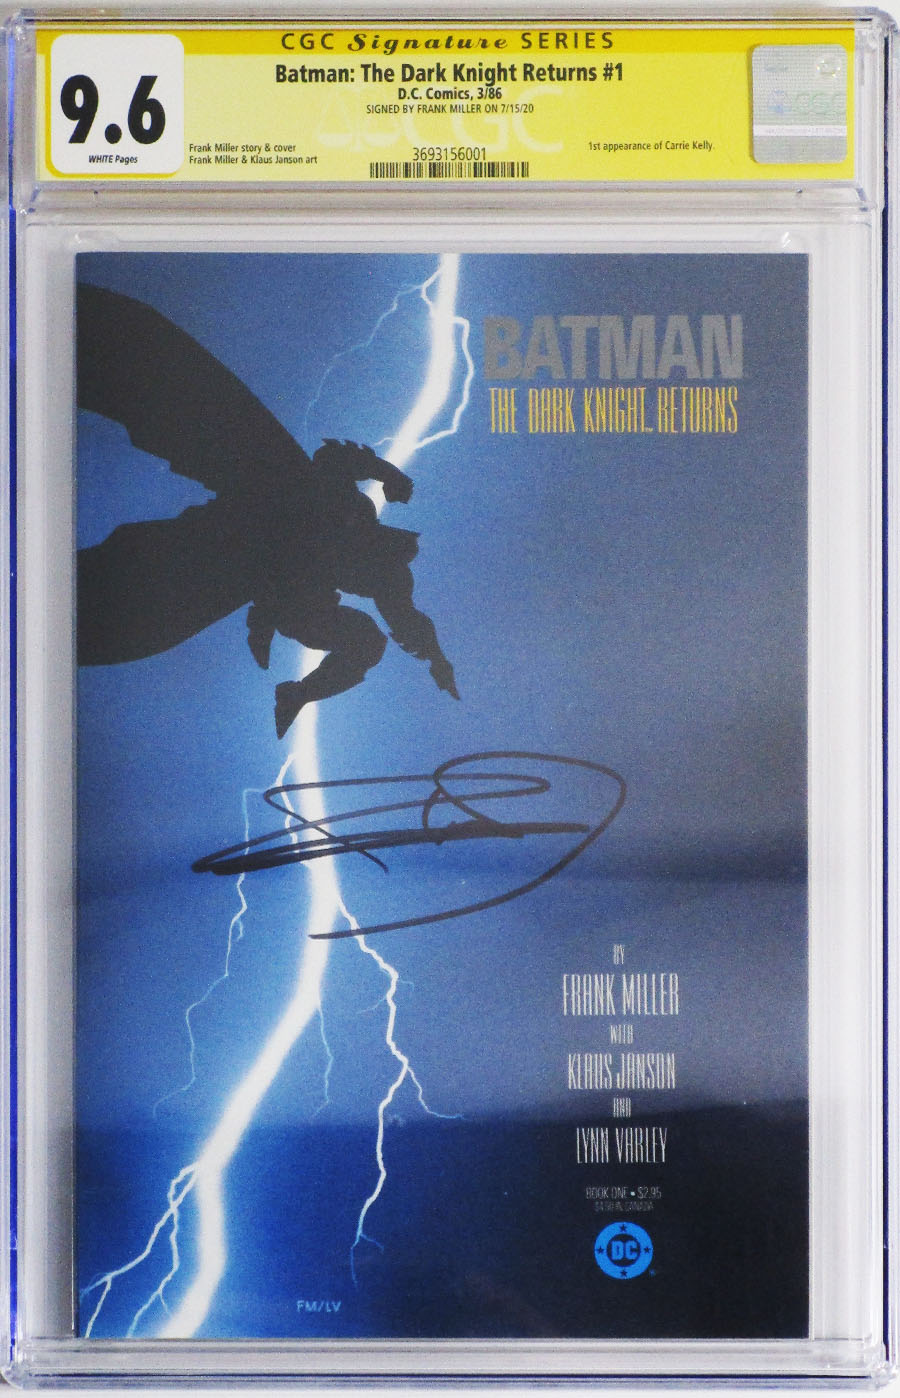 Batman The Dark Knight Returns #1 Cover P CGC Signature Series 9.6 Signed by Frank Miller 1st Ptg